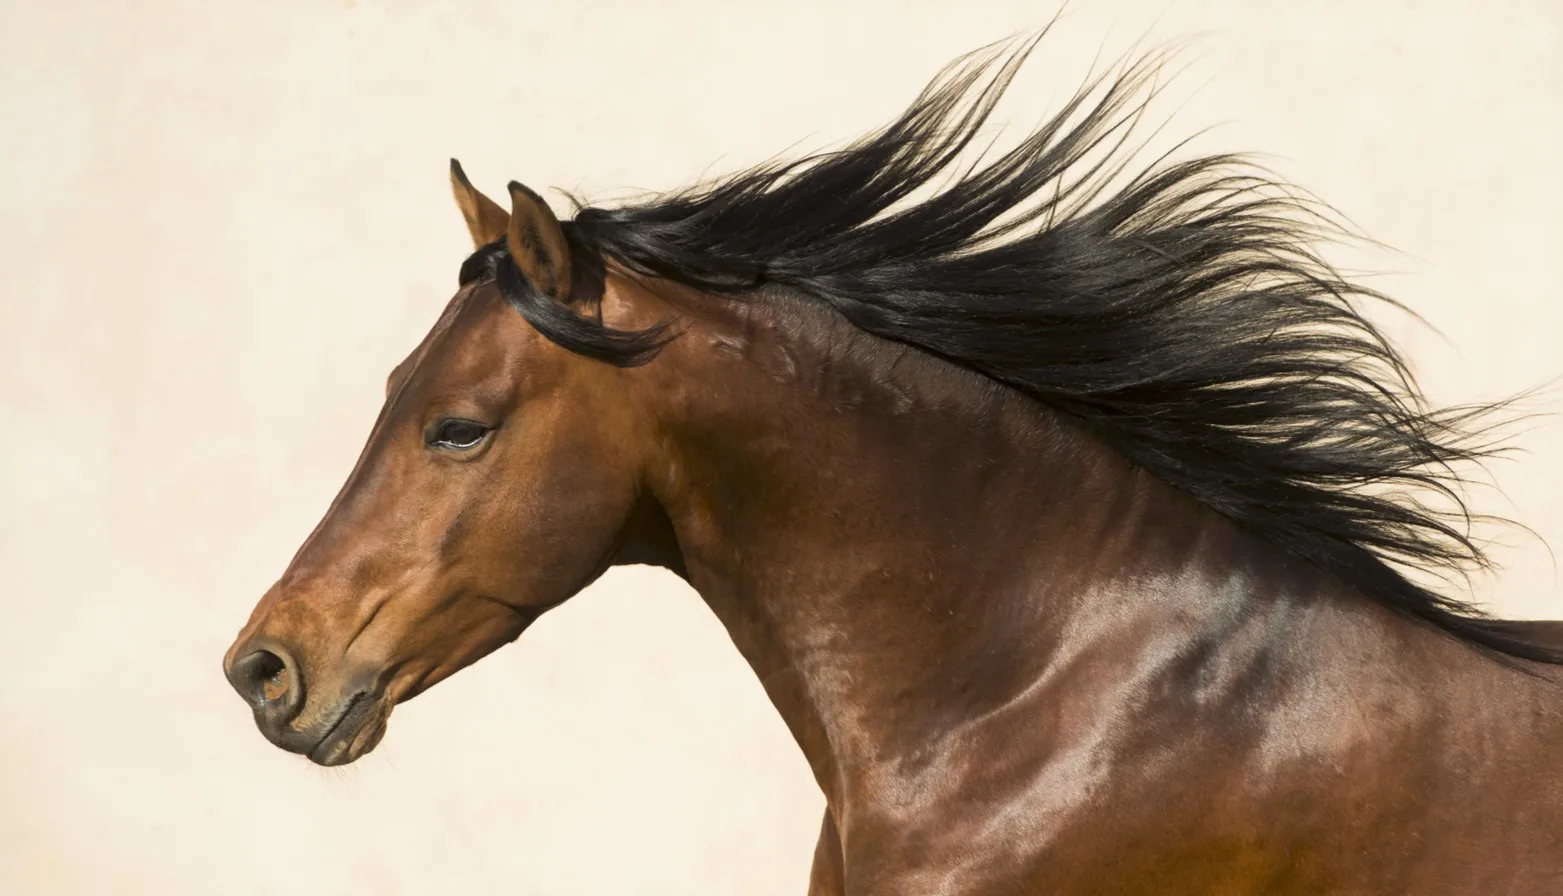 African horse breeds list, history, facts, and more